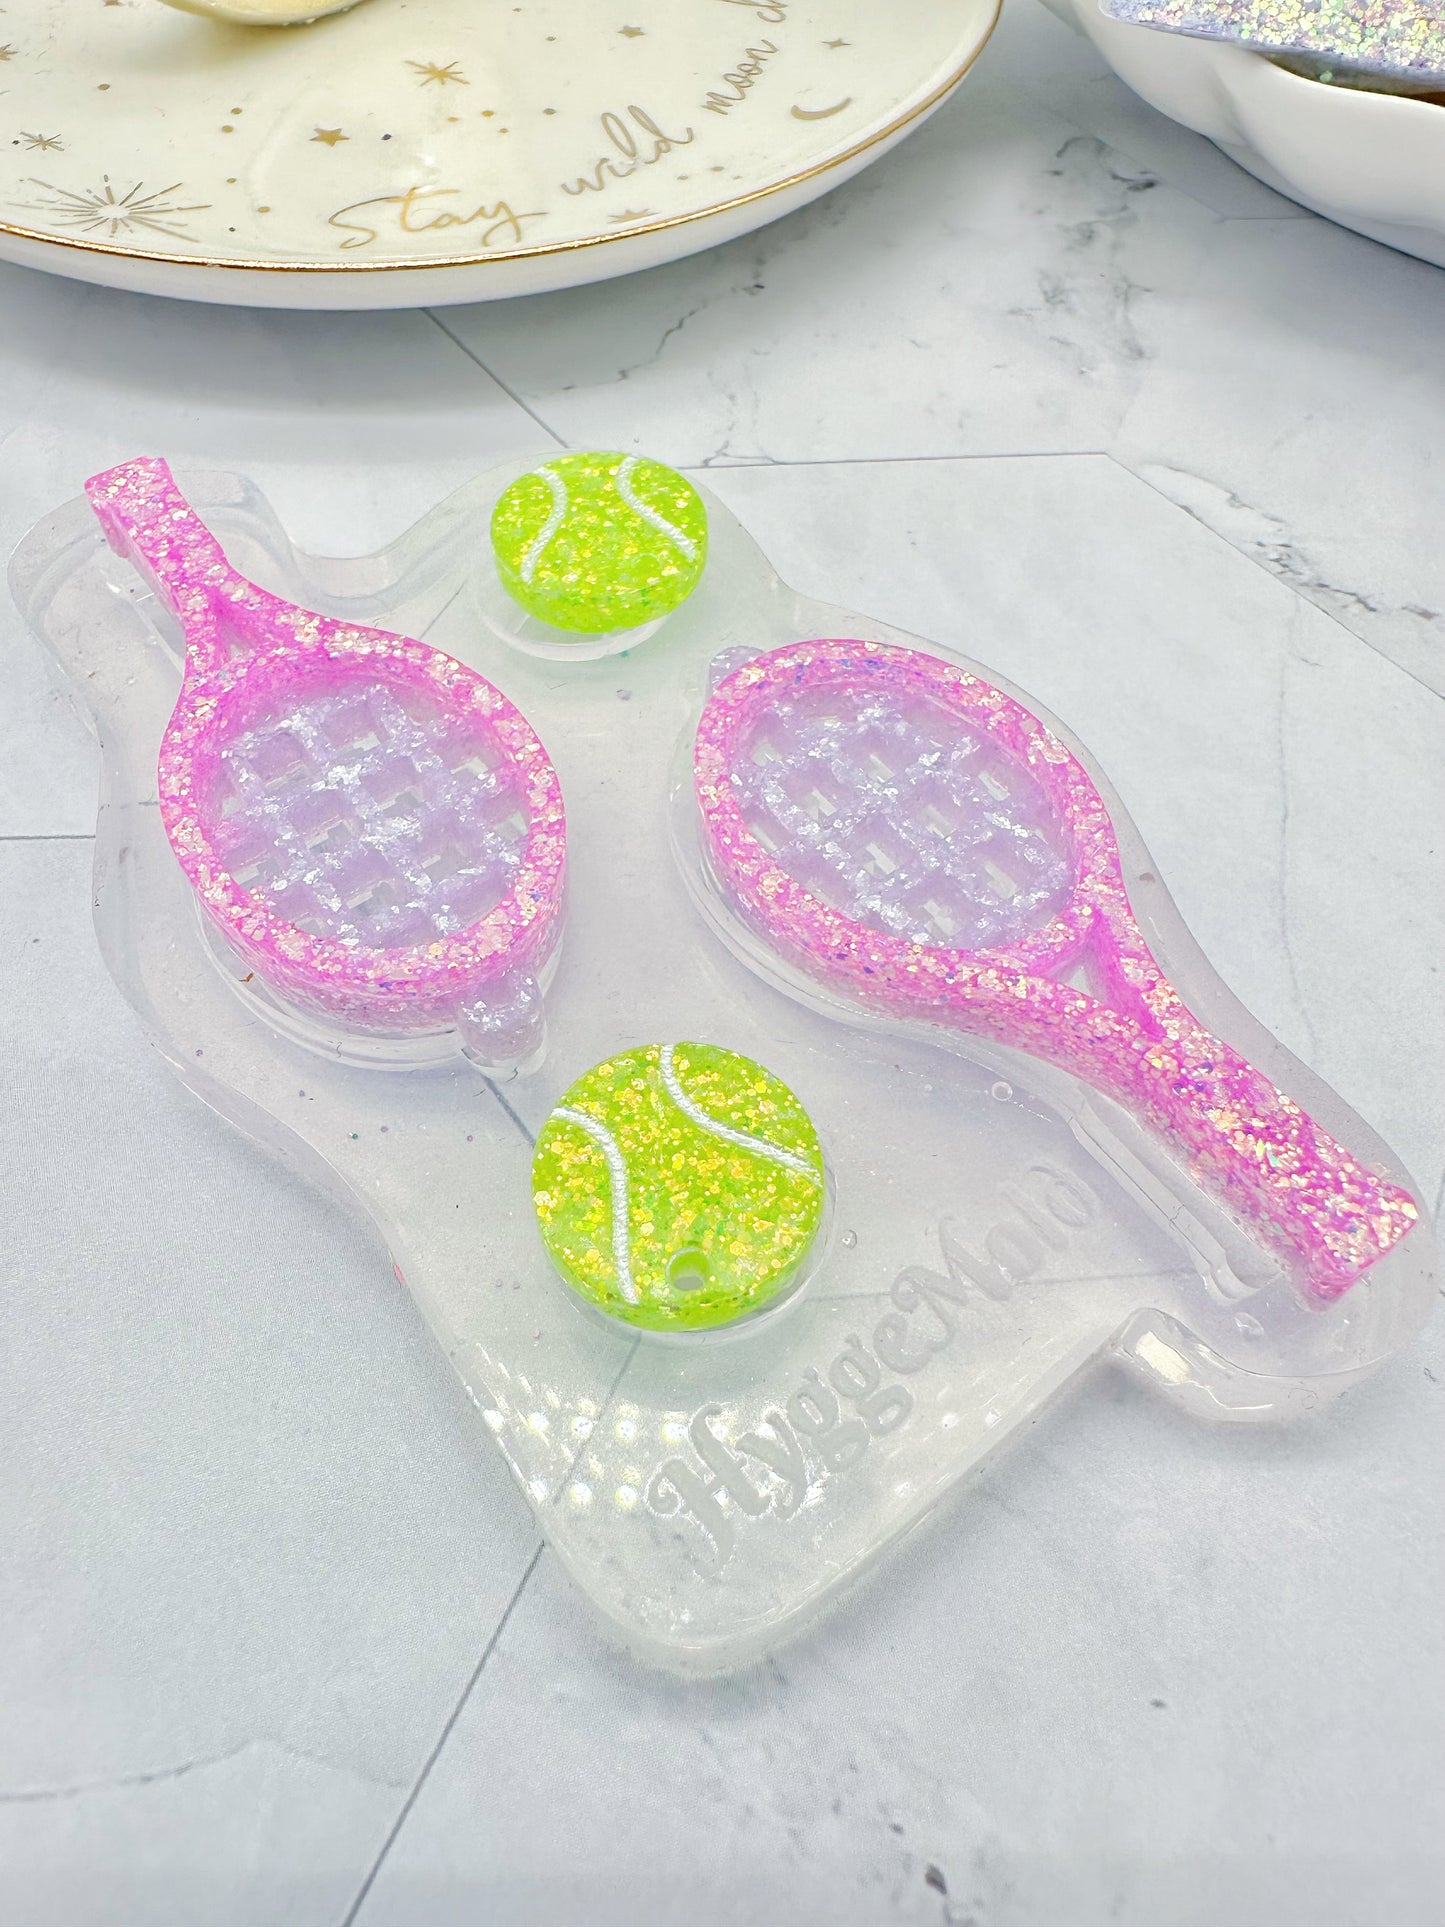 Tennis Ball and Racket Earring Mold Silicone Mold for Resin Earrings